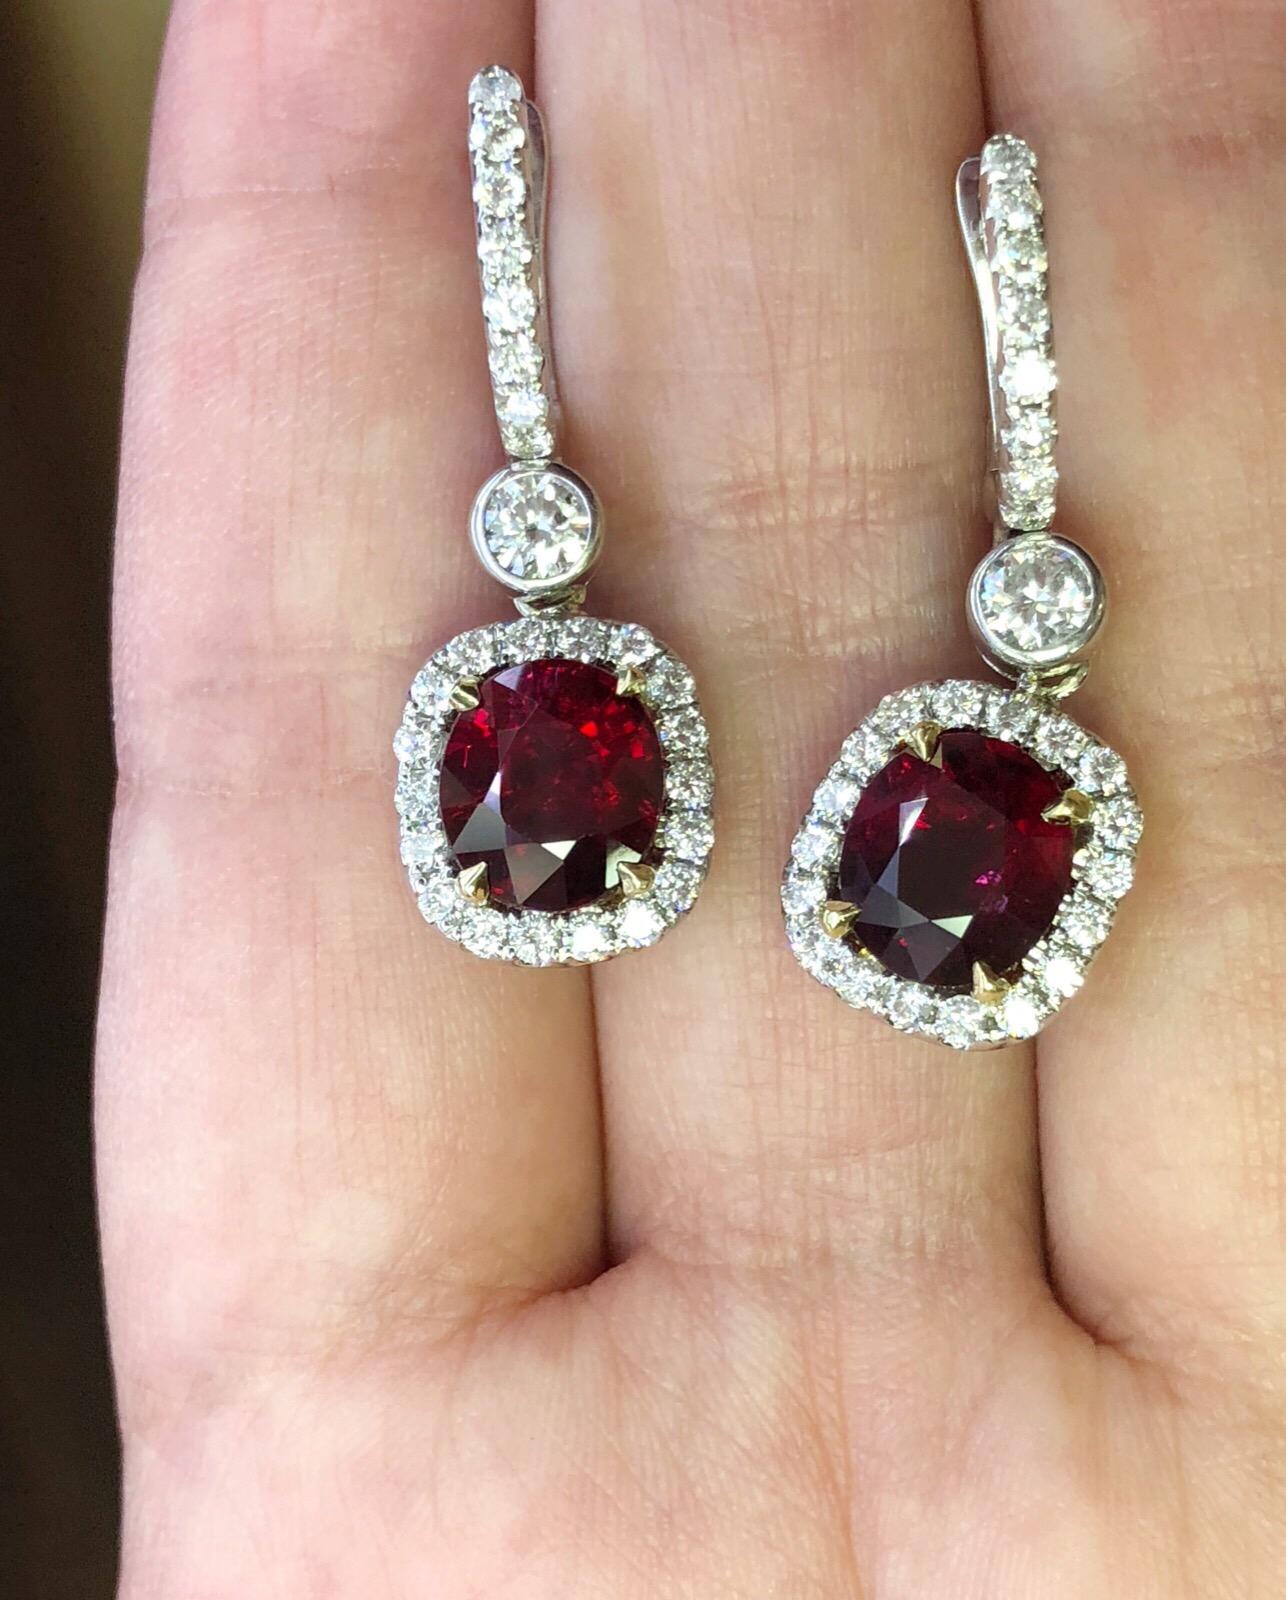 4.74 Carat total weight of natural oval rubies (GIA reports for both rubies) with 1.10 CTW of round brilliant diamonds in 18K white gold earrings. The rubies are a rich, saturated red color and wonderfully mathched.

Measurements of Ruby 1 - 2.59